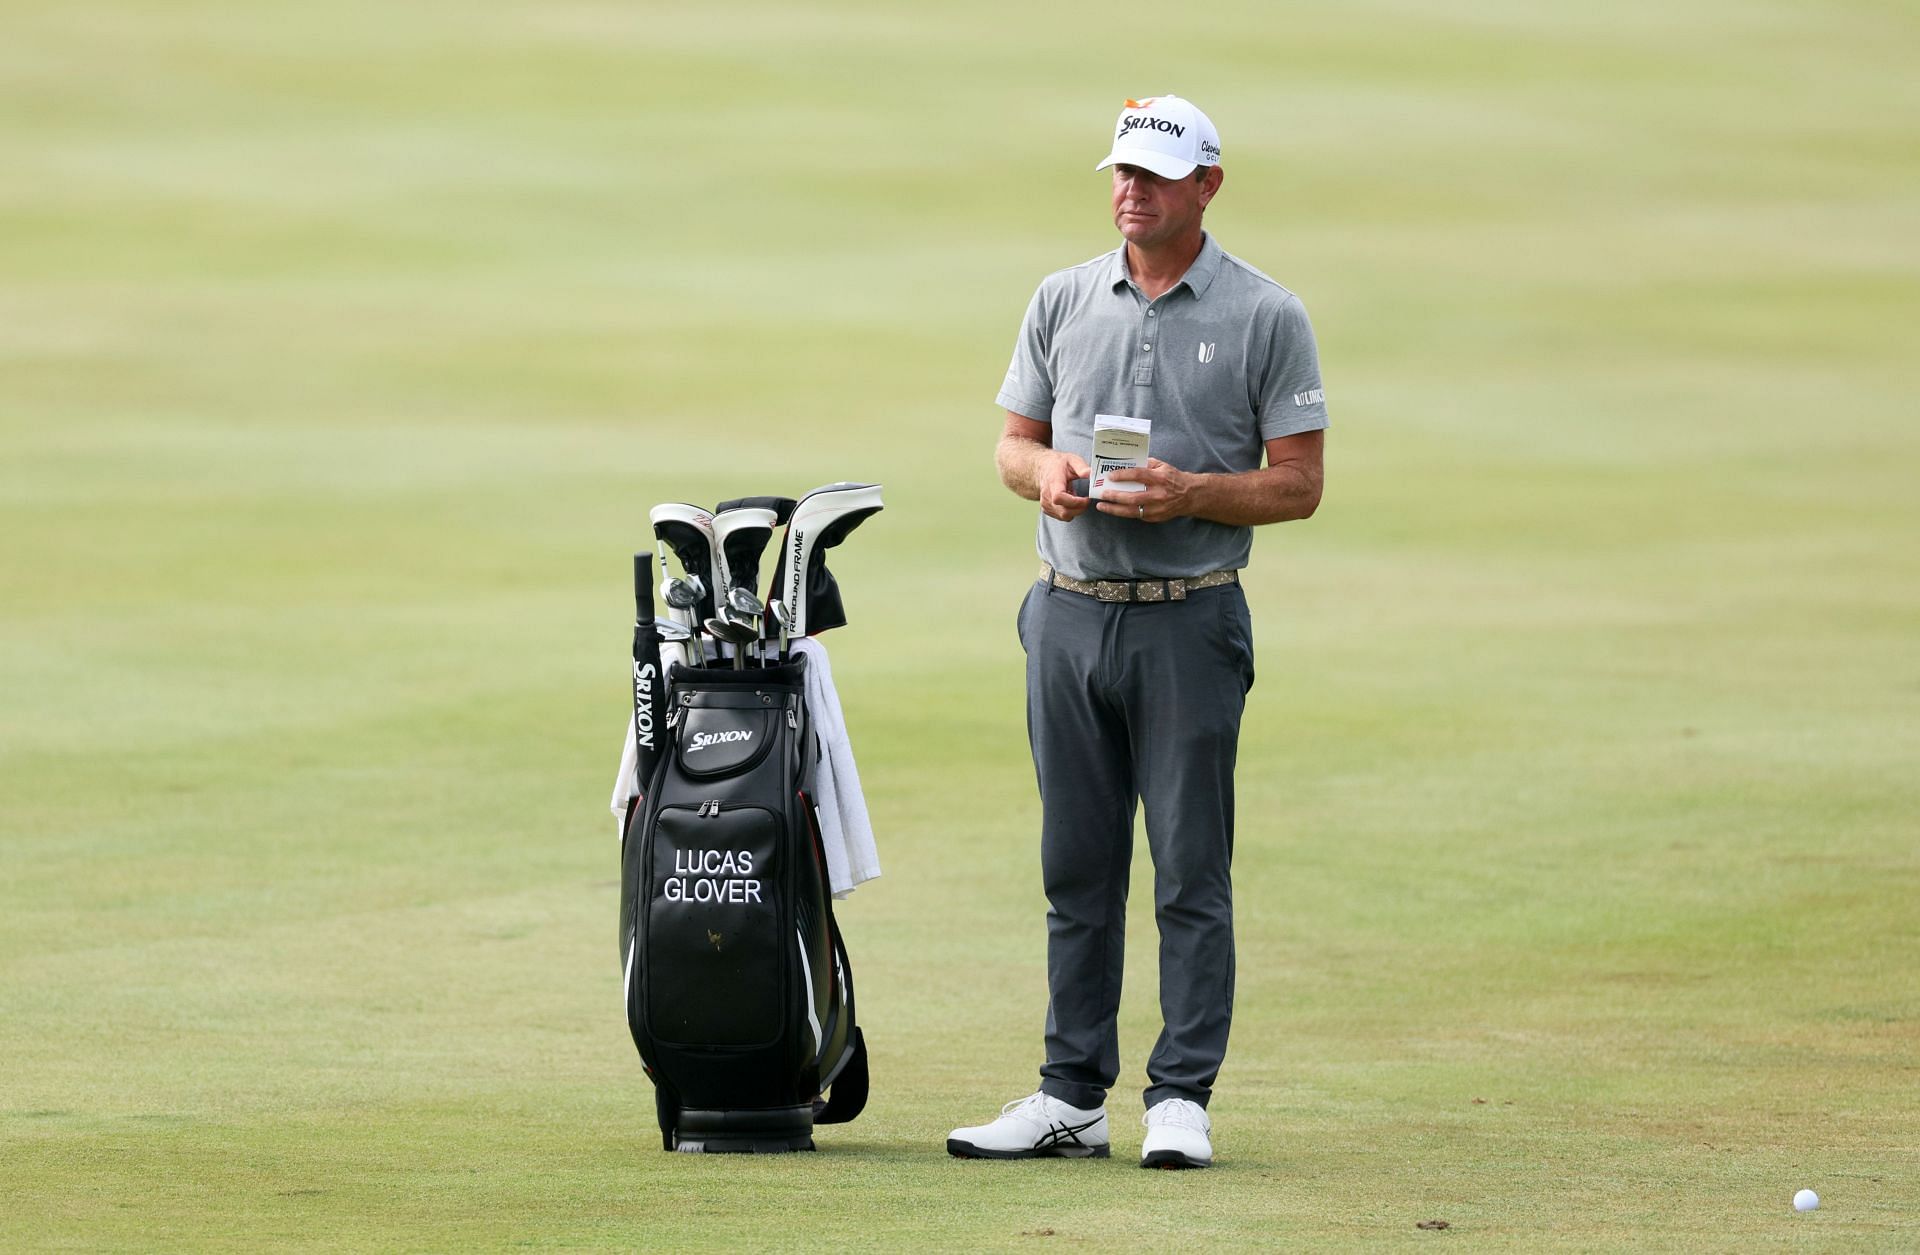 Lucas Glover at the Barbasol Championship - Round Two (Image via Getty)